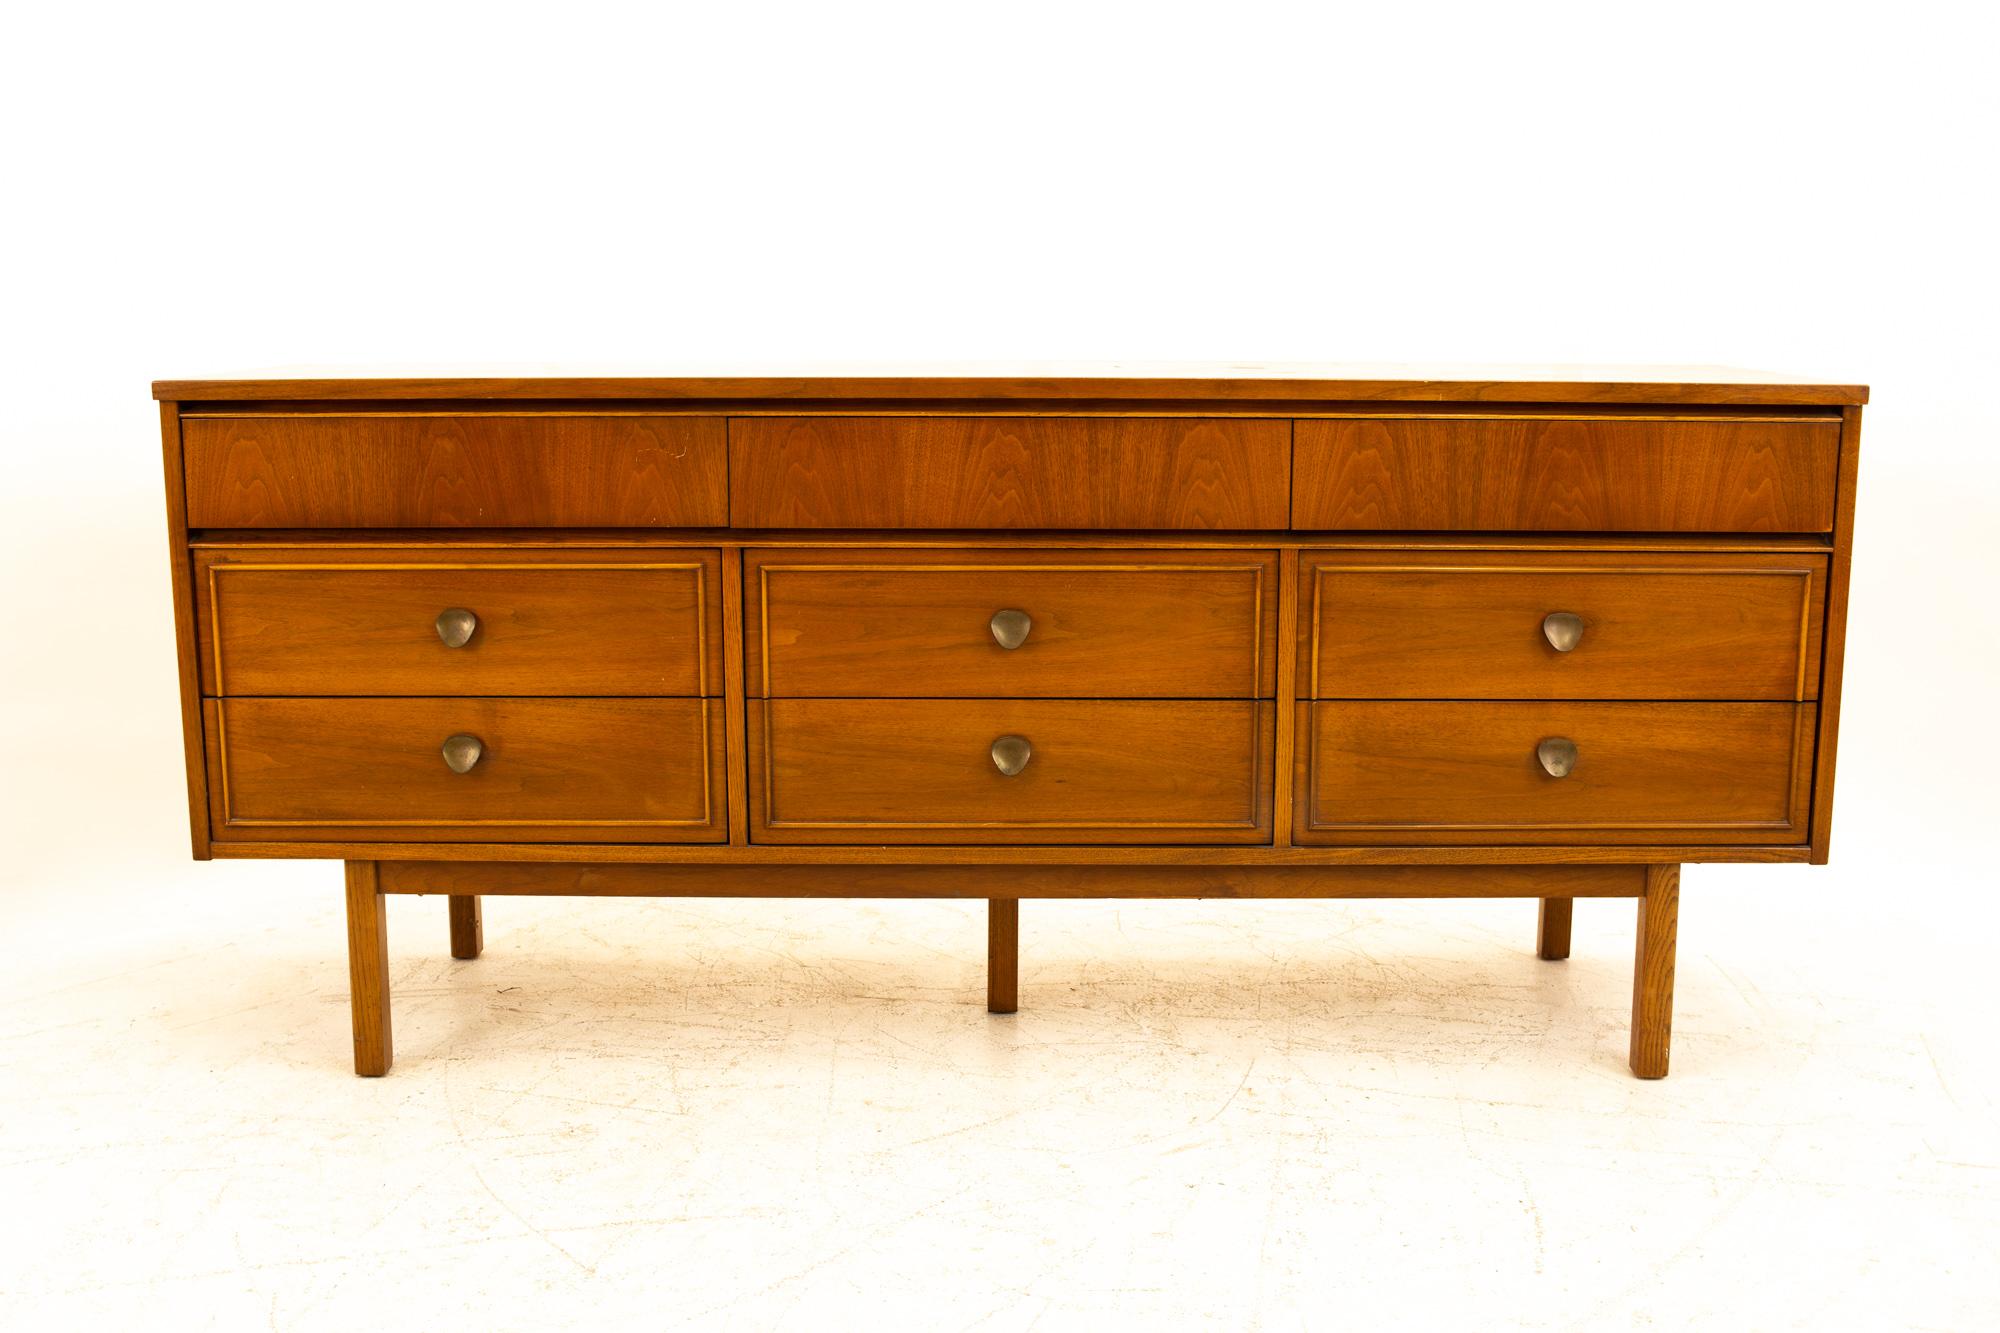 Dixie Furniture Mid Century  walnut 9-drawer lowboy dresser
Dresser measures: 71.75 wide x 18.5 wide x 31 high

All pieces of furniture can be had in what we call restored vintage condition. That means the piece is restored upon purchase so it’s